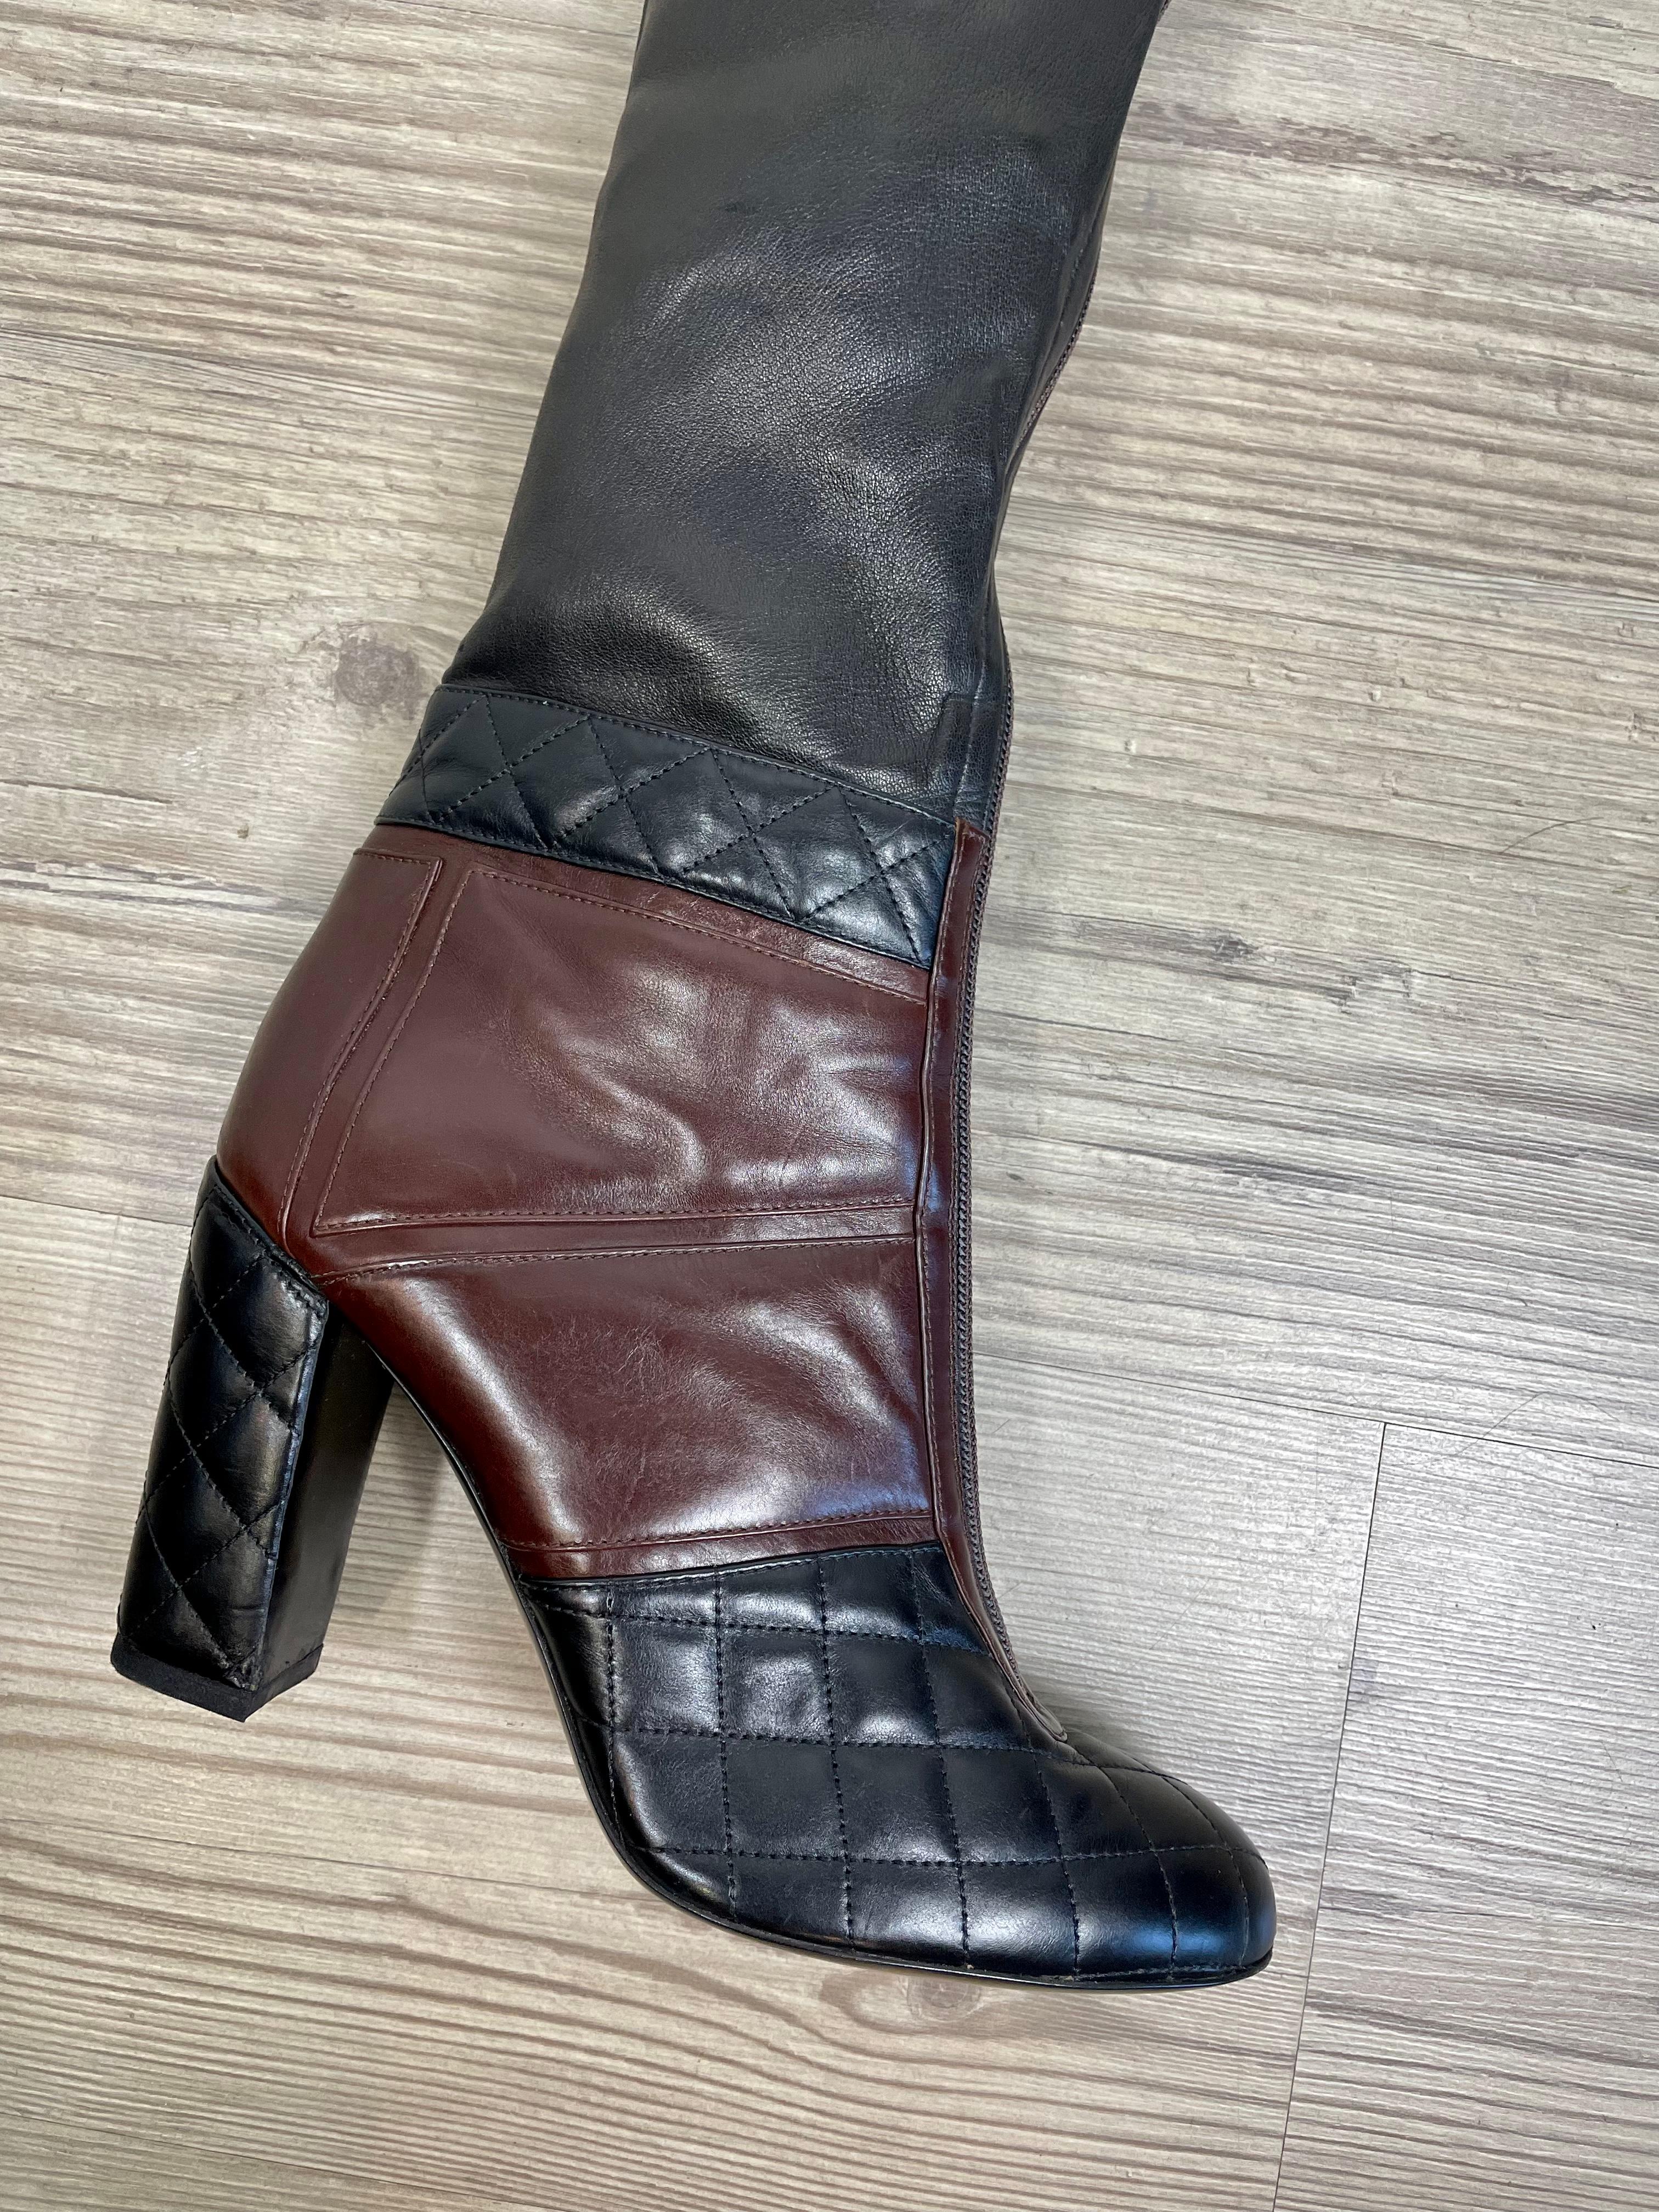 Women's Chanel black and brown leather boots